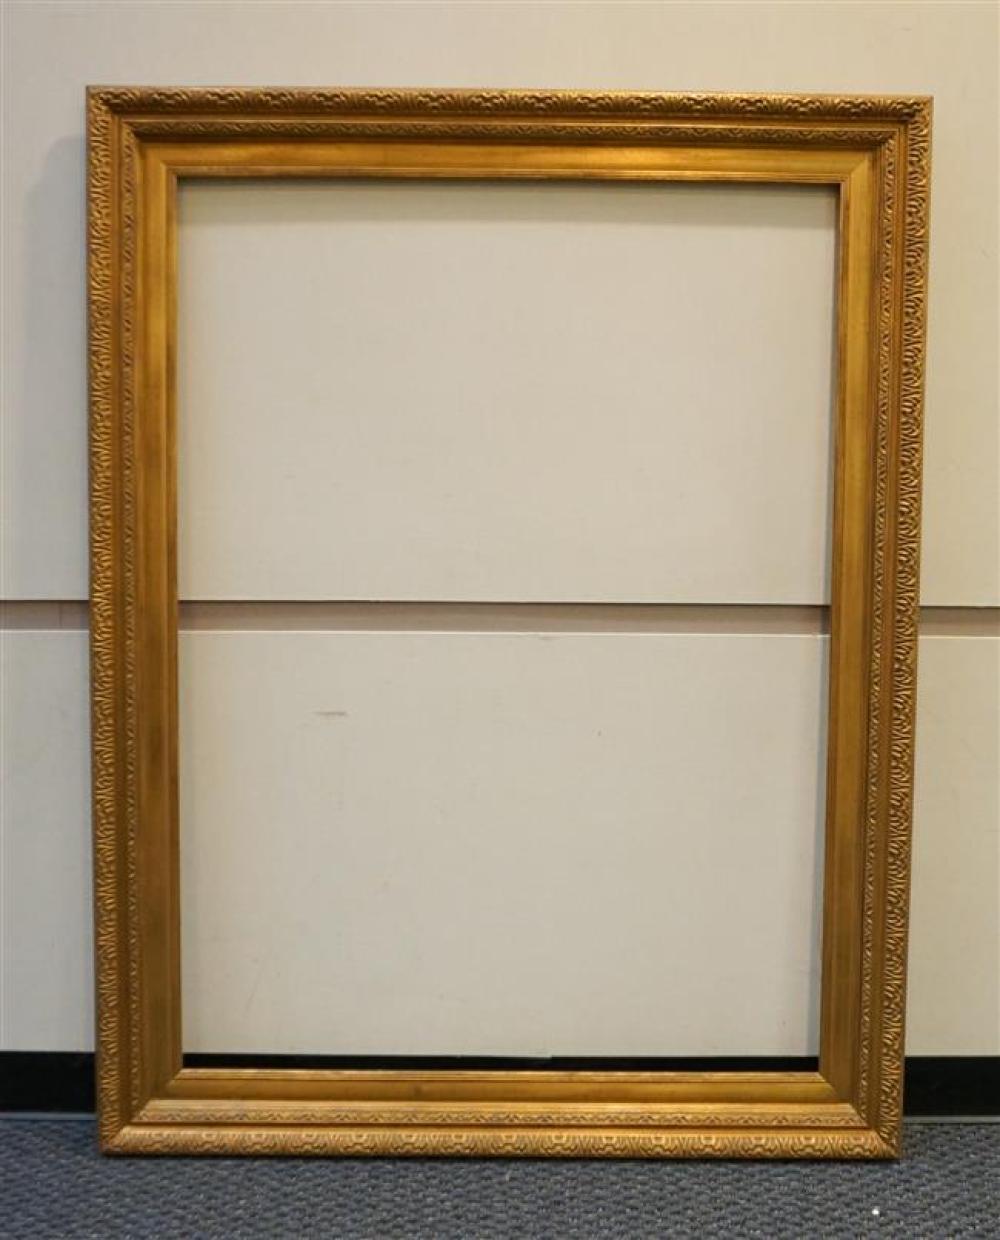 GOLD PAINTED FRAME, 65-1/2 X 49-3/4